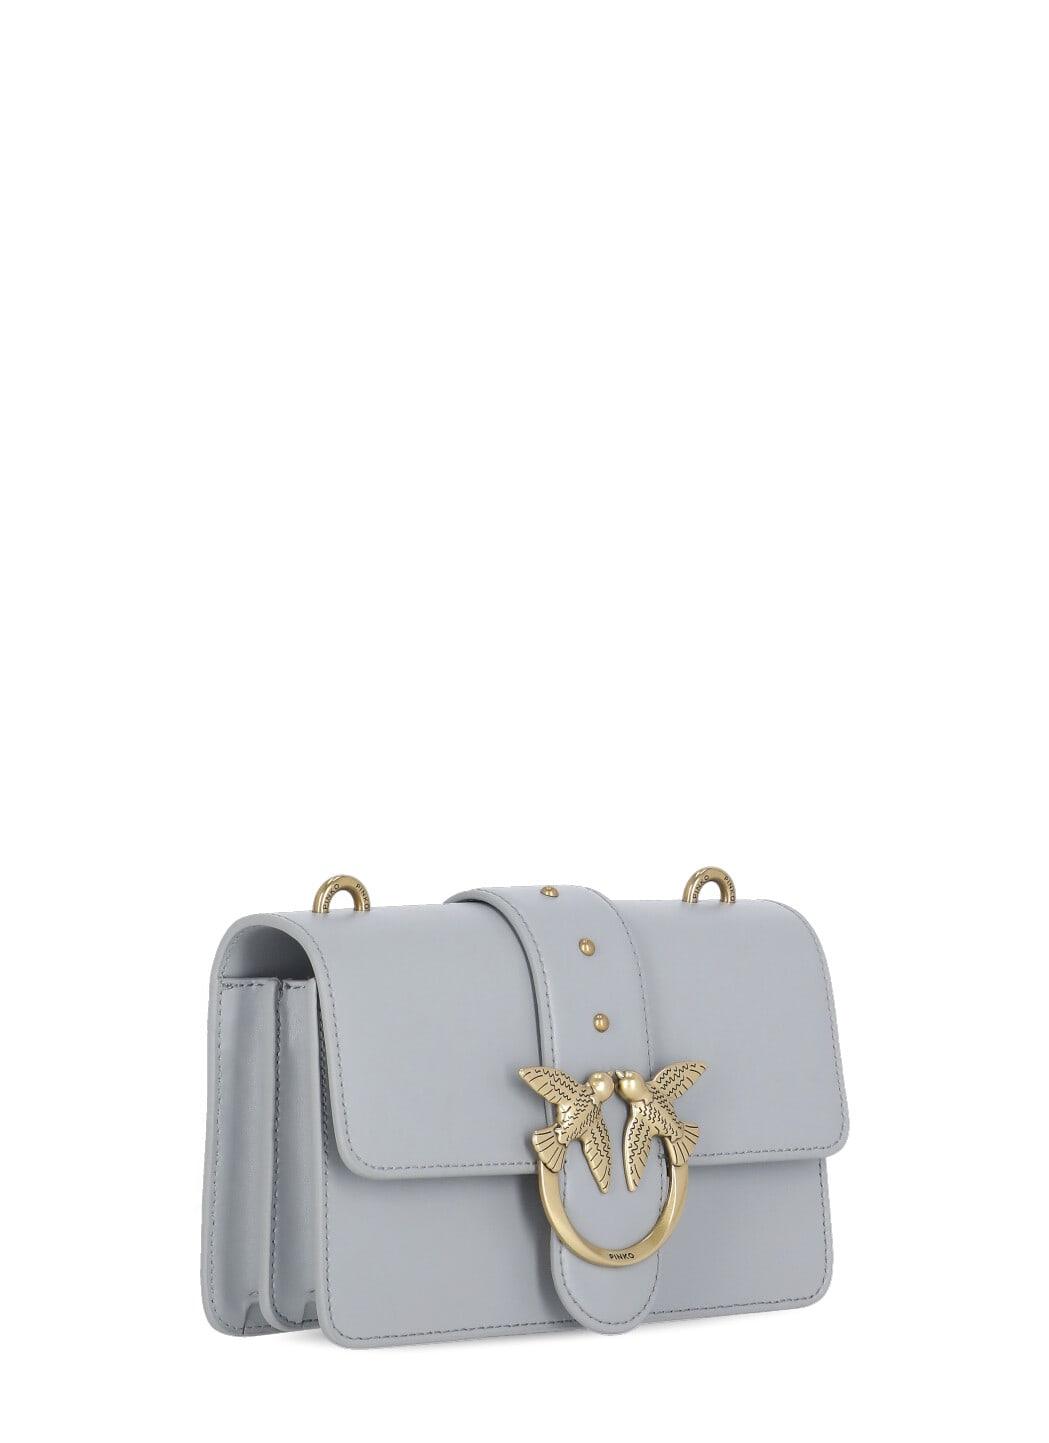 Pinko Leather Love Icon Simply Shoulder Bag in Grey (White) - Save 10% |  Lyst